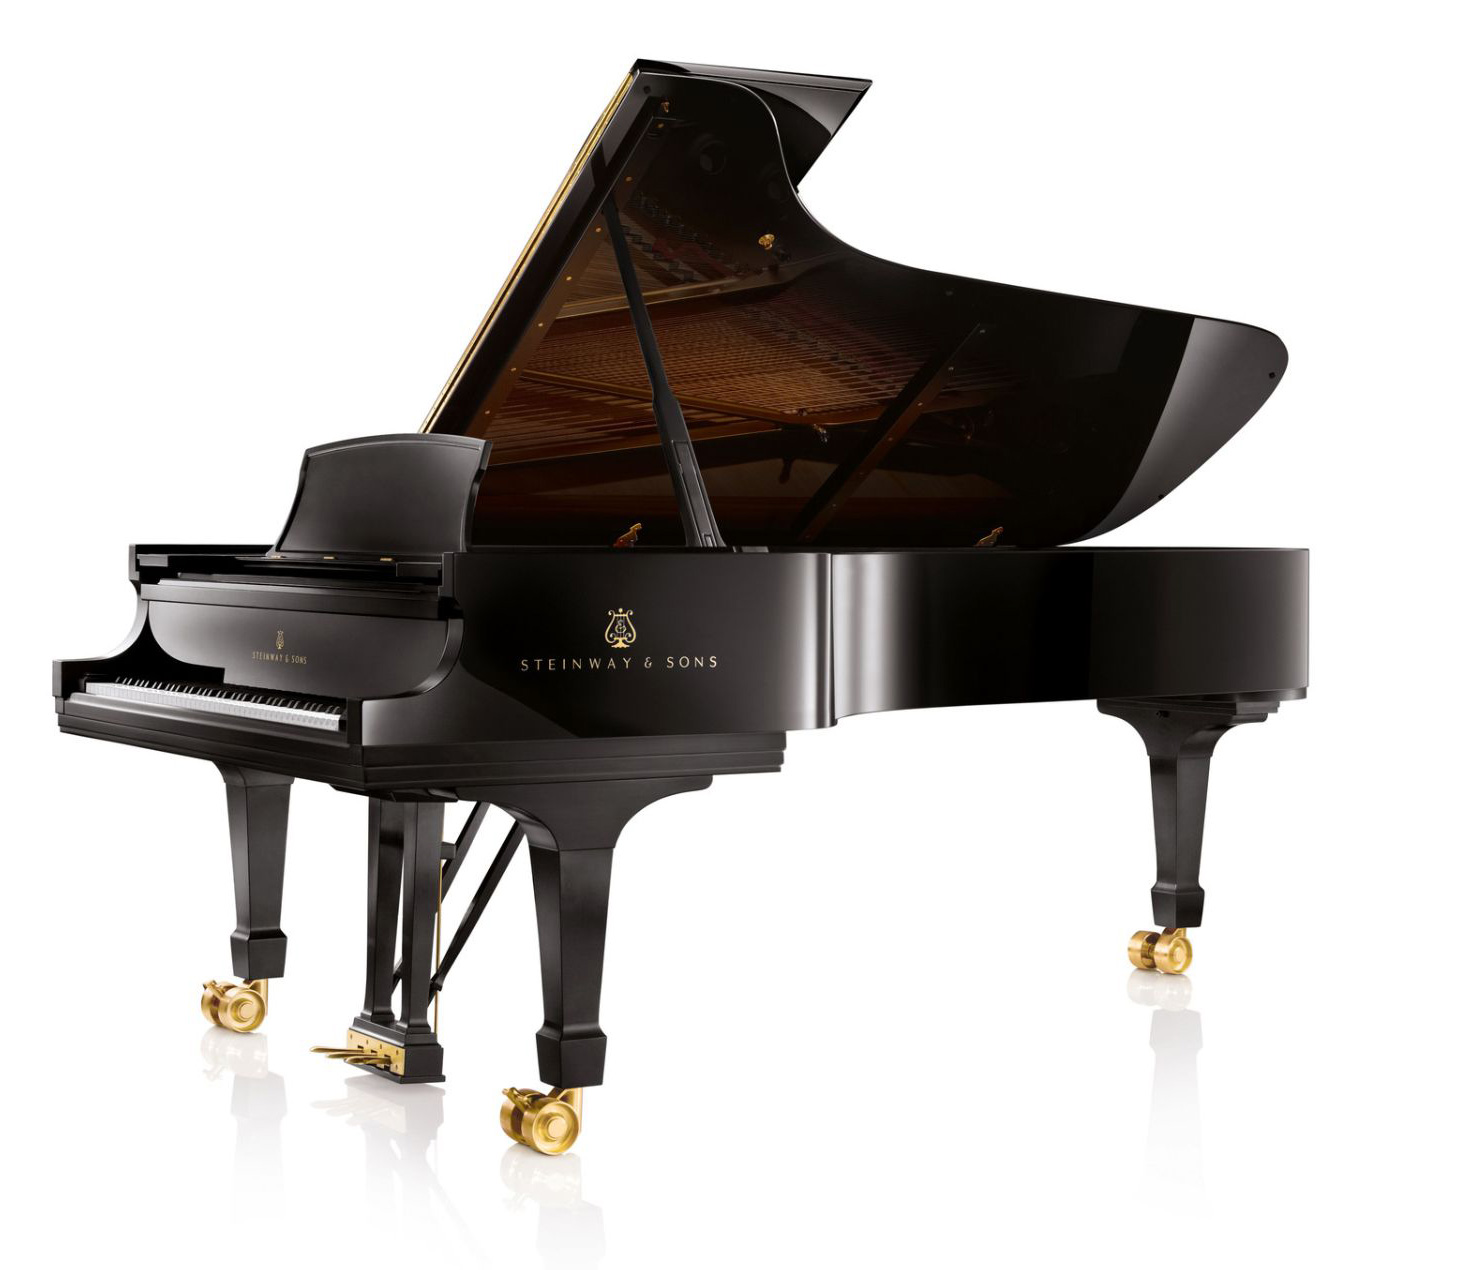 Steinway & Sons 施坦威A款